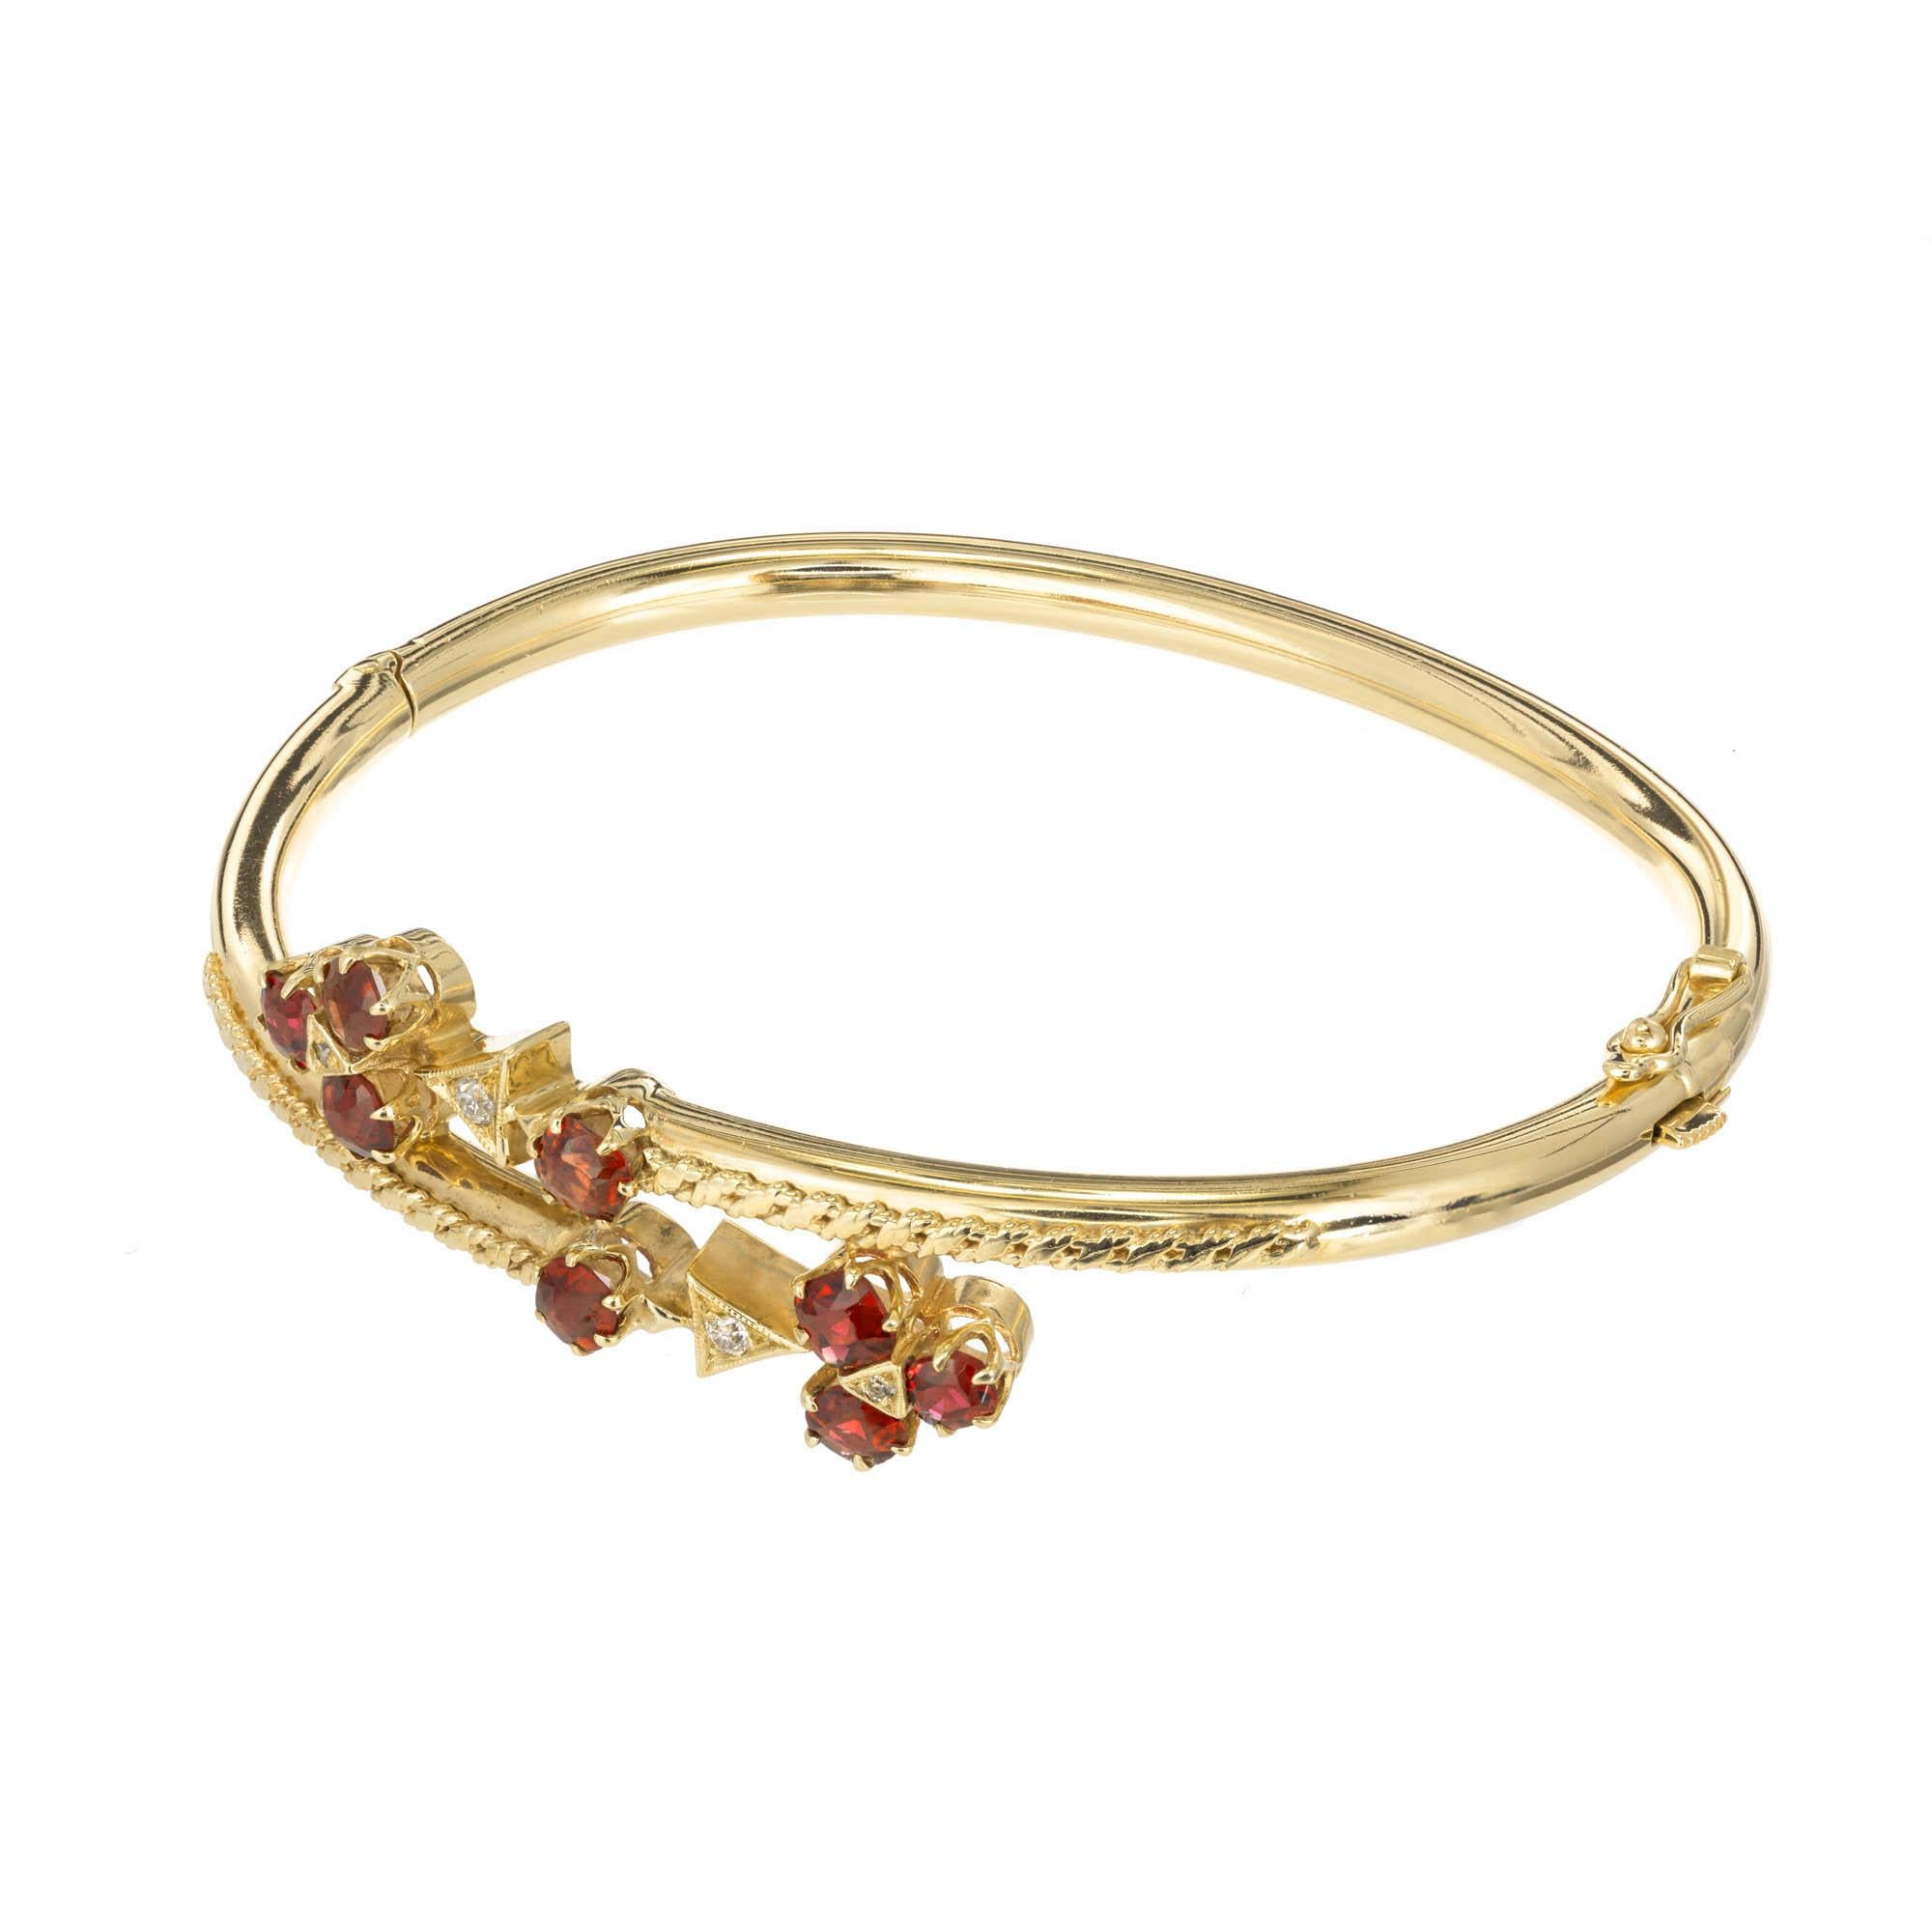 14k Yellow gold diamond and garnet bypass bangle. Three round garnets prong set with a diamond in the center attached to a triangular setting with a round diamond makes a clover like design attached to an additional garnet.
 
8 old European cut